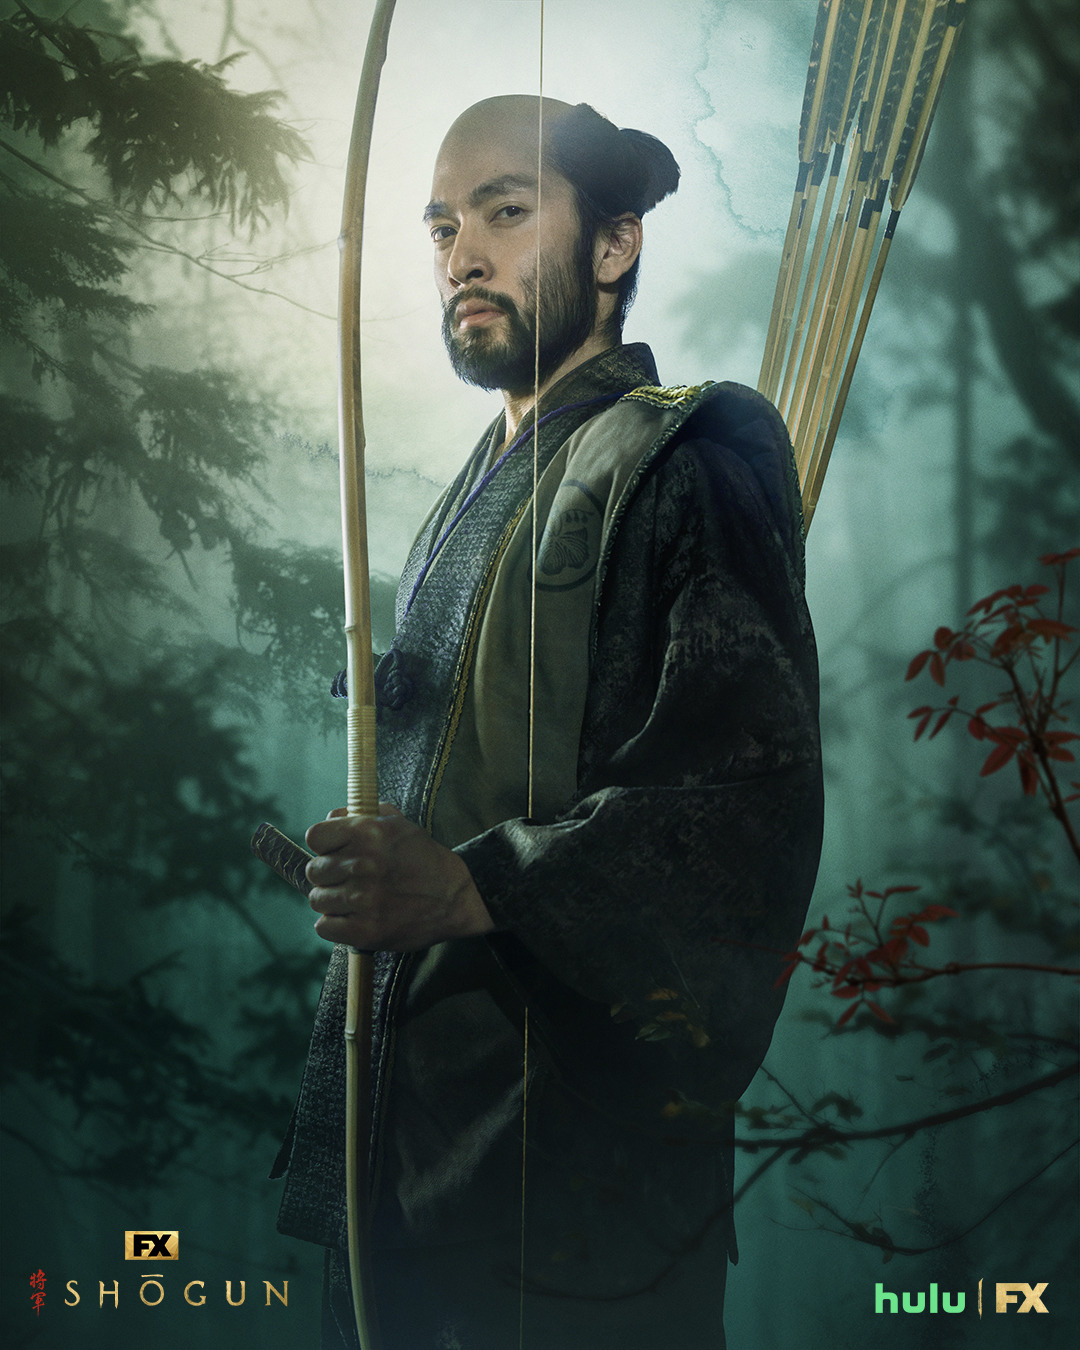 Extra Large TV Poster Image for Shogun (#4 of 24)